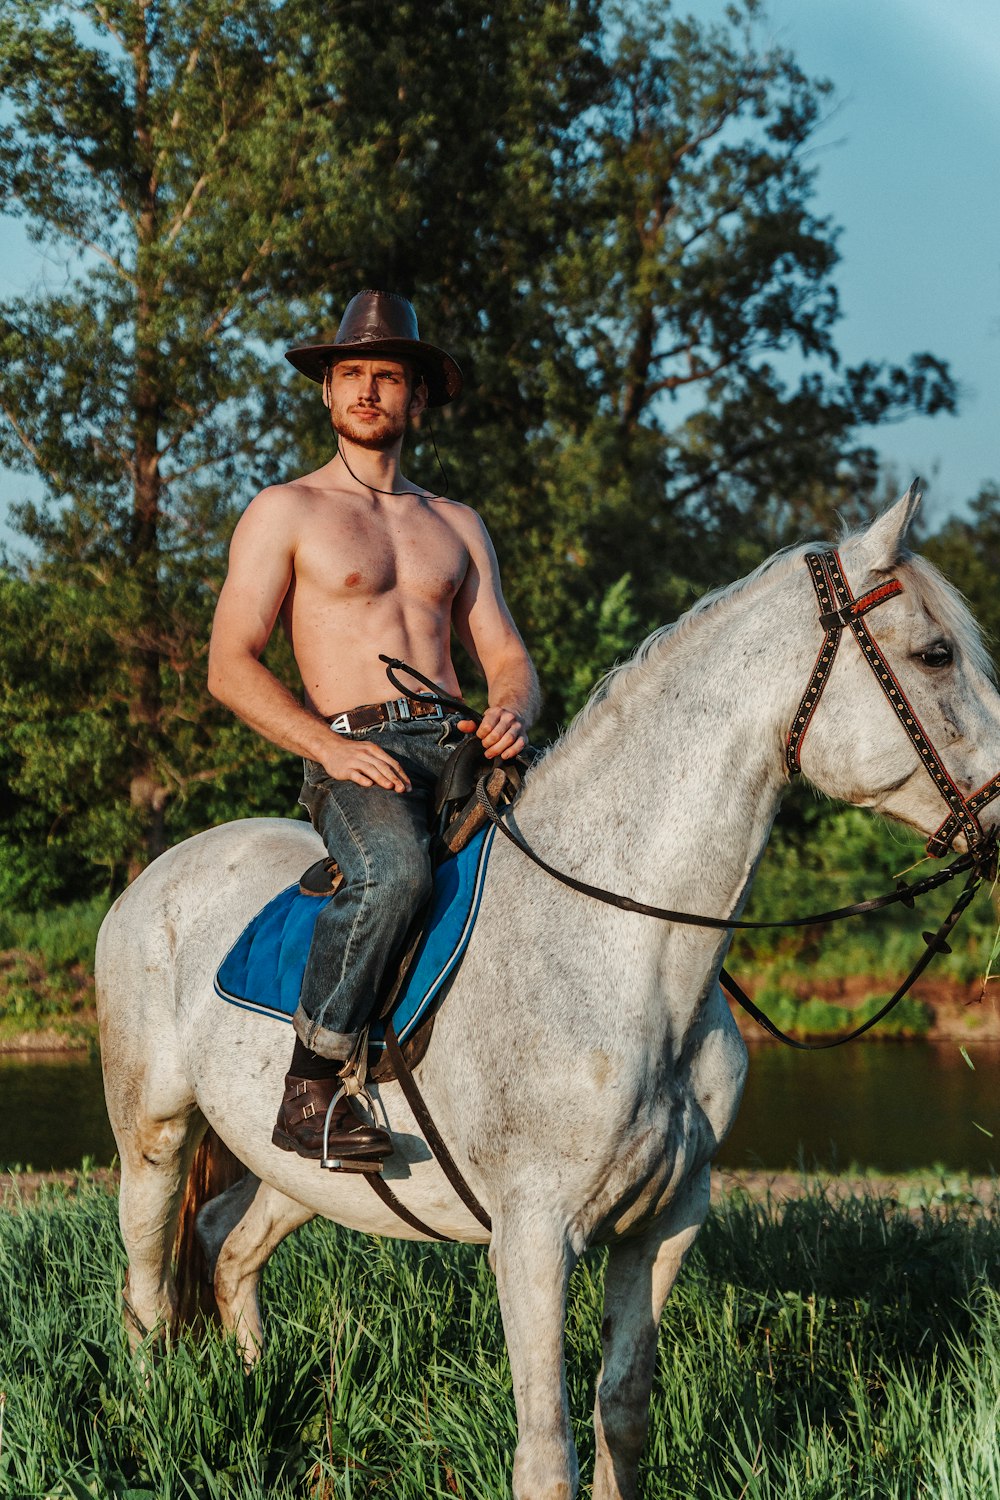 a shirtless man riding a white horse in a field